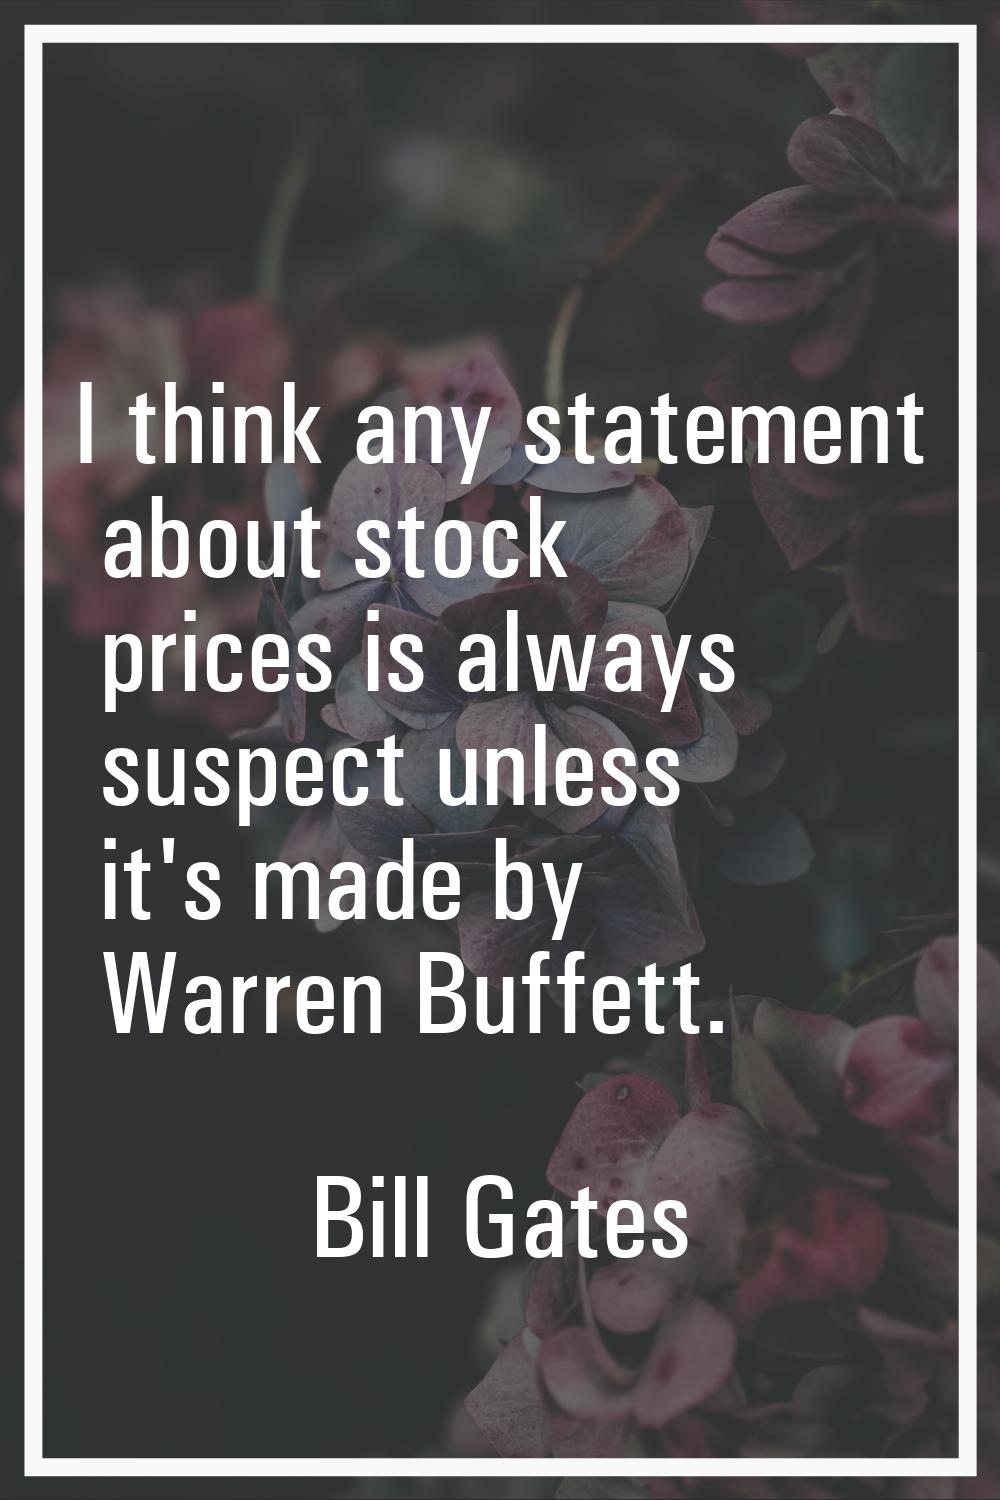 I think any statement about stock prices is always suspect unless it's made by Warren Buffett.